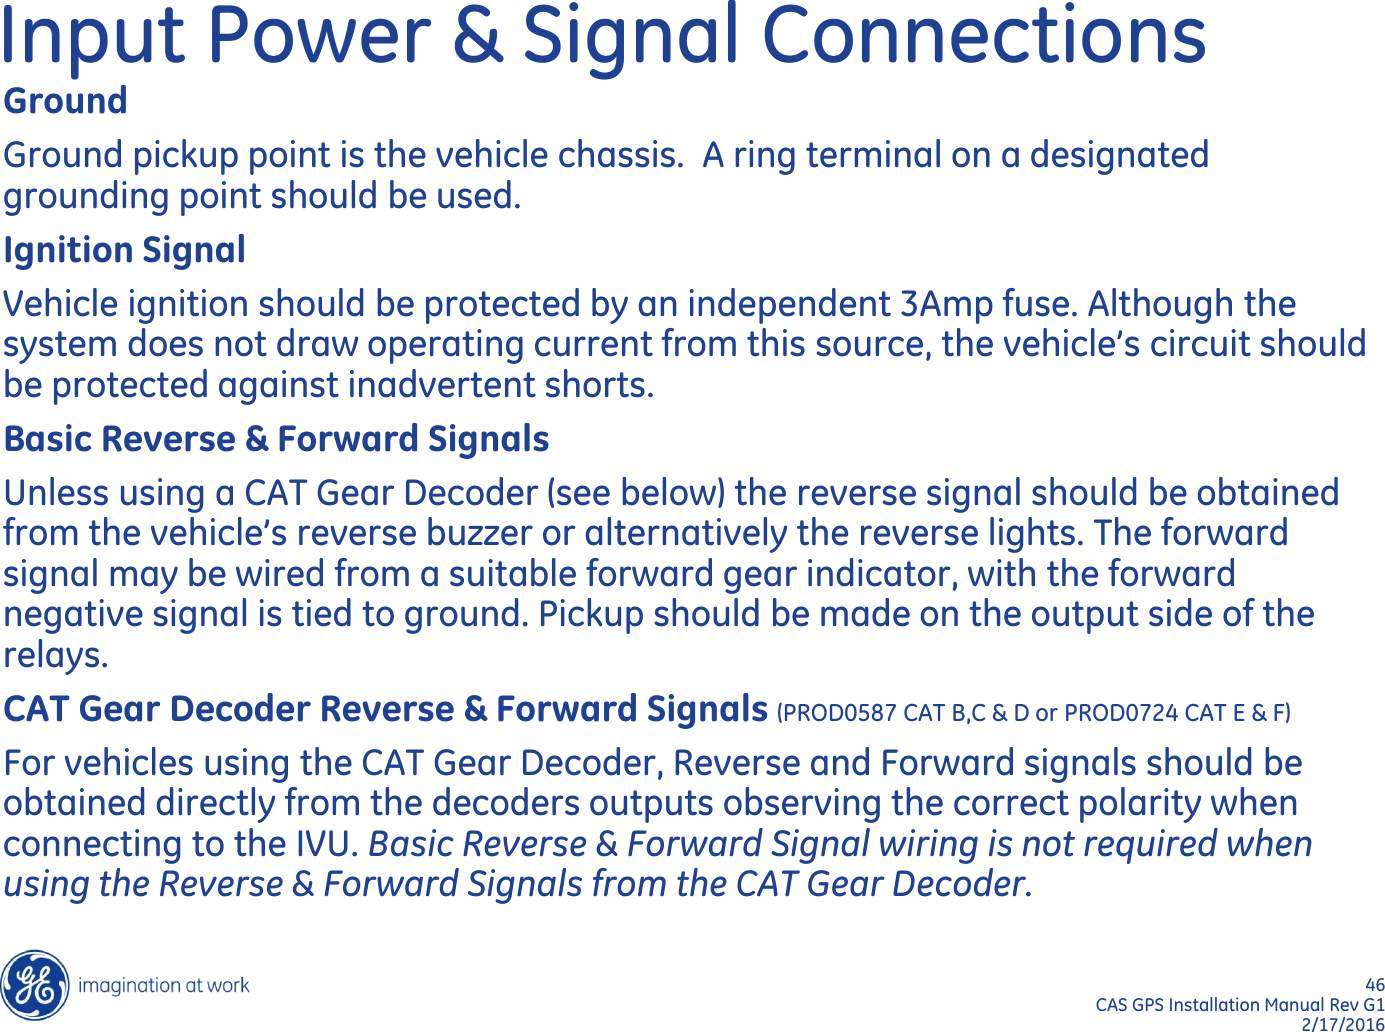 46  CAS GPS Installation Manual Rev G1 2/17/2016 Input Power &amp; Signal Connections Ground Ground pickup point is the vehicle chassis.  A ring terminal on a designated grounding point should be used. Ignition Signal Vehicle ignition should be protected by an independent 3Amp fuse. Although the system does not draw operating current from this source, the vehicle’s circuit should be protected against inadvertent shorts. Basic Reverse &amp; Forward Signals Unless using a CAT Gear Decoder (see below) the reverse signal should be obtained from the vehicle’s reverse buzzer or alternatively the reverse lights. The forward signal may be wired from a suitable forward gear indicator, with the forward negative signal is tied to ground. Pickup should be made on the output side of the relays.  CAT Gear Decoder Reverse &amp; Forward Signals (PROD0587 CAT B,C &amp; D or PROD0724 CAT E &amp; F) For vehicles using the CAT Gear Decoder, Reverse and Forward signals should be obtained directly from the decoders outputs observing the correct polarity when connecting to the IVU. Basic Reverse &amp; Forward Signal wiring is not required when using the Reverse &amp; Forward Signals from the CAT Gear Decoder. 